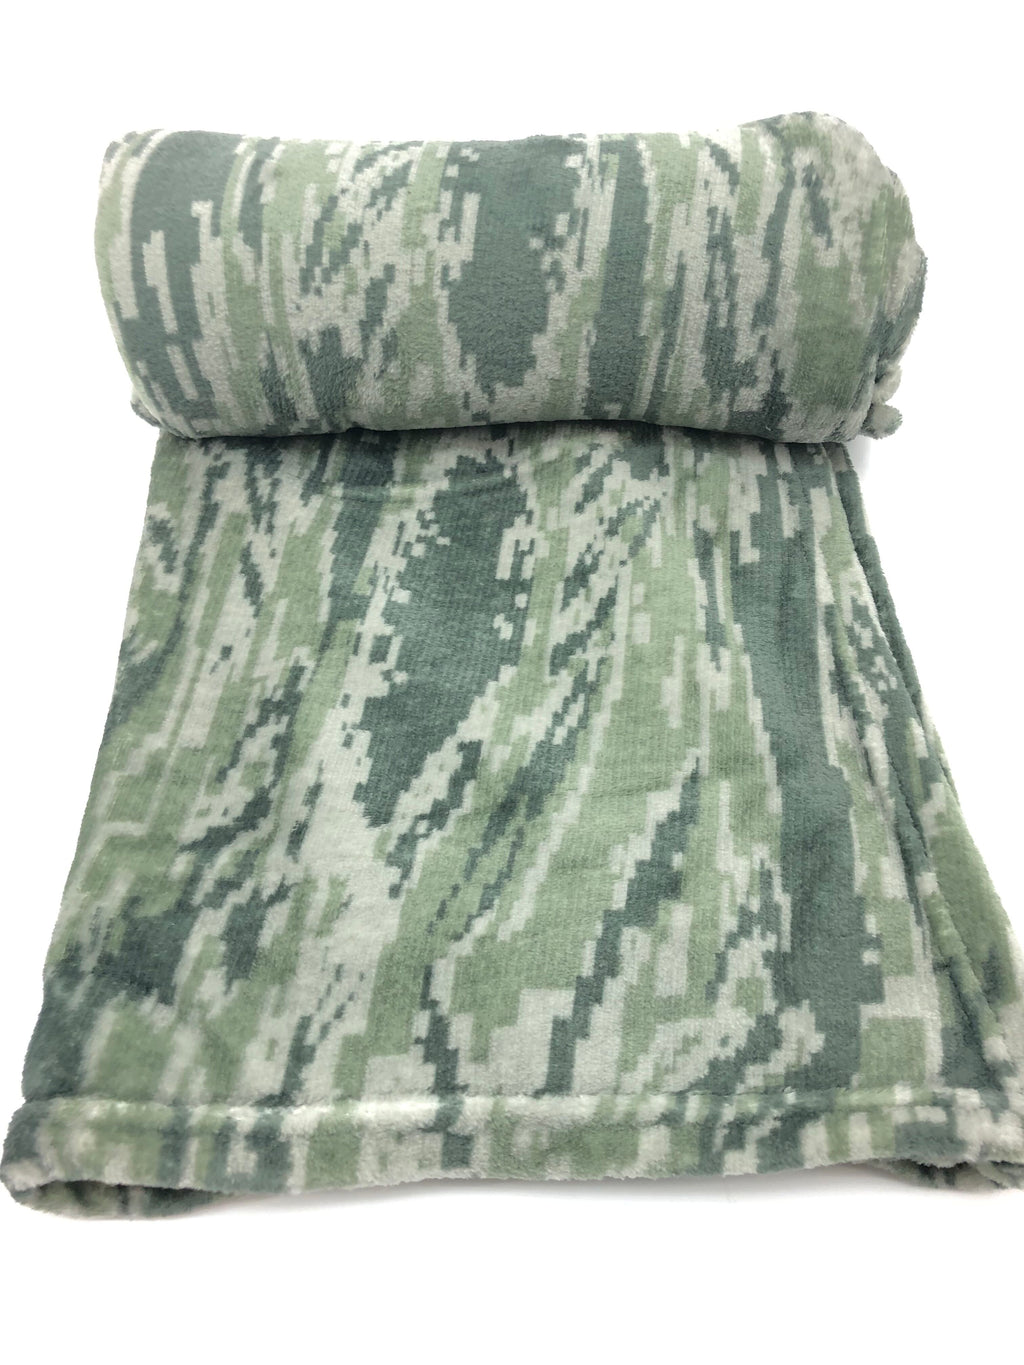 Air Force Camouflage Blanket (20pc case)